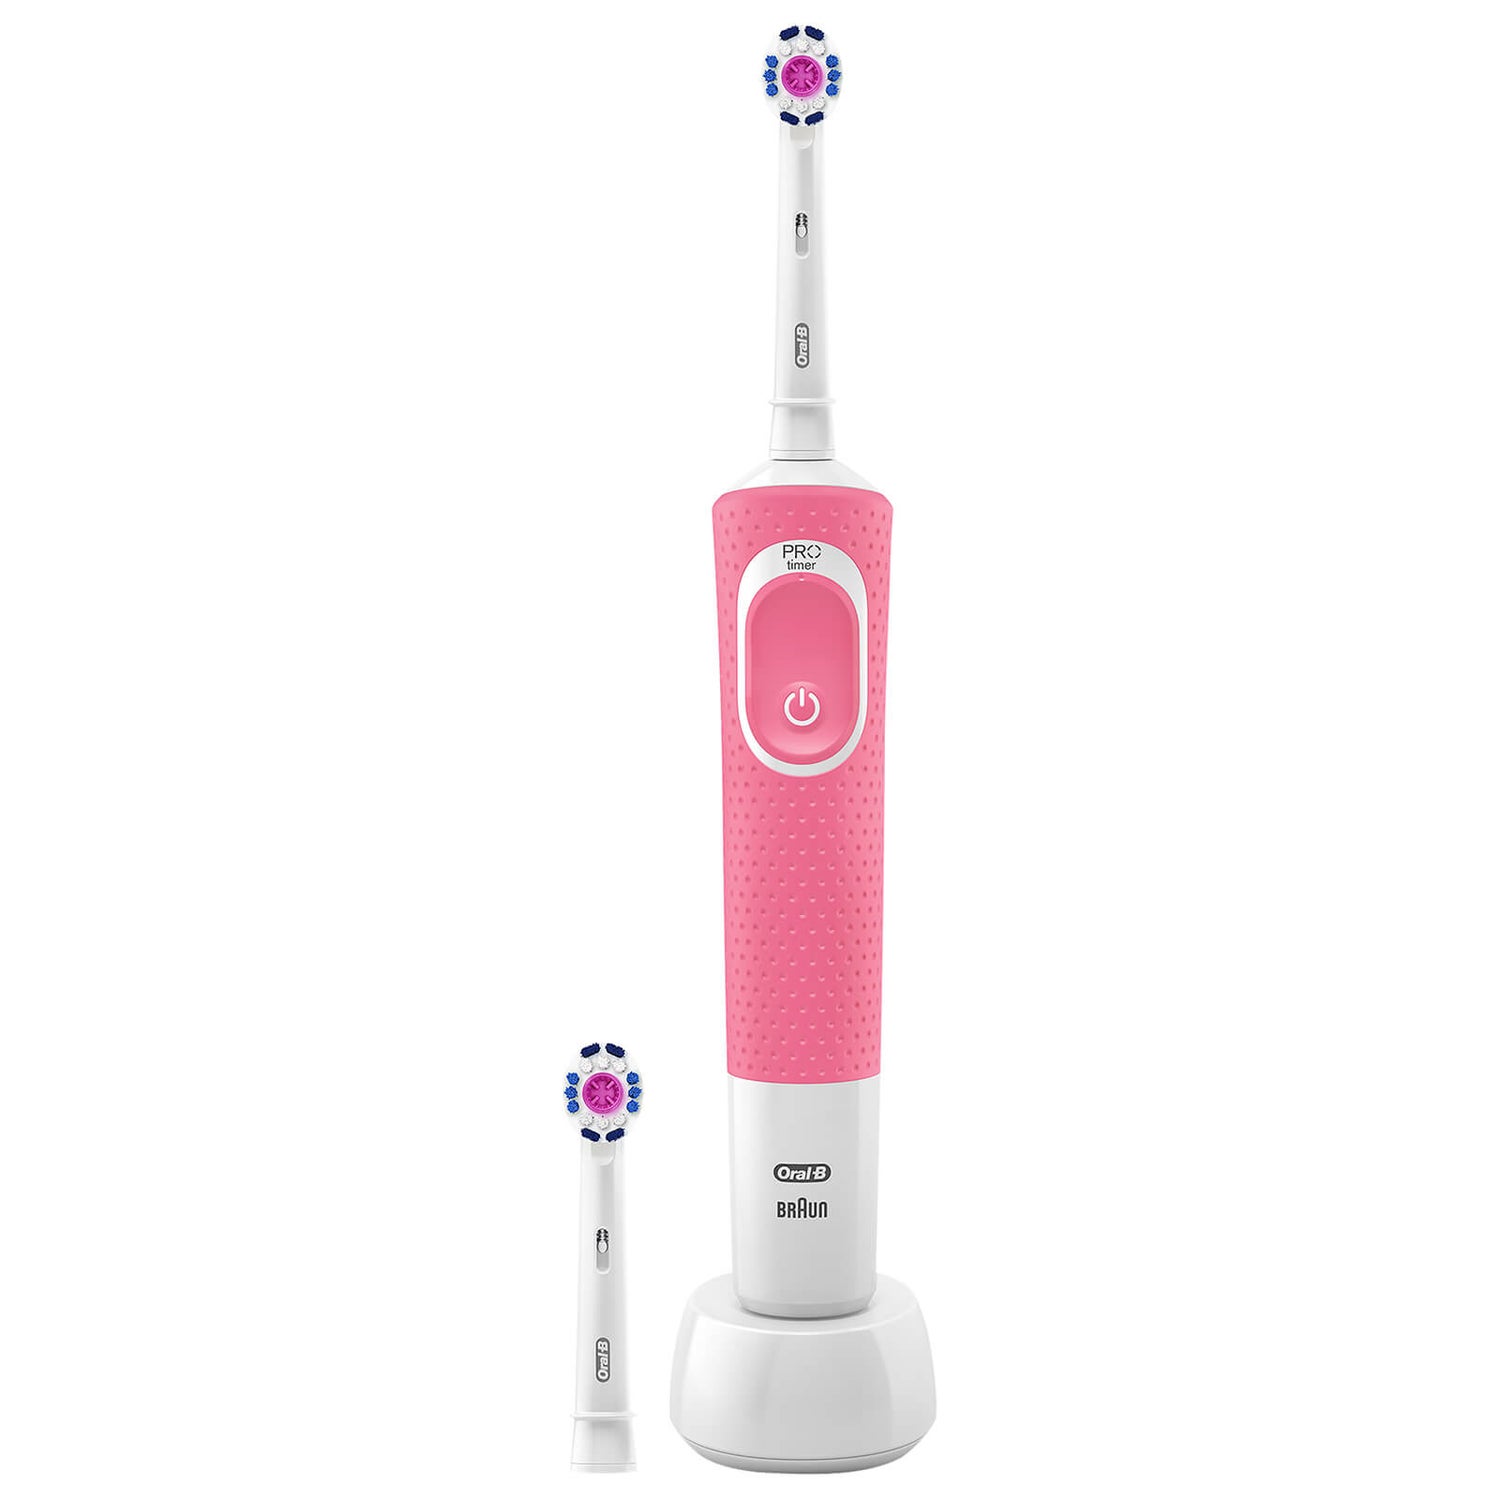 Oral-B Vitality Plus White and Clean Power Handle Electric Toothbrush - Pink